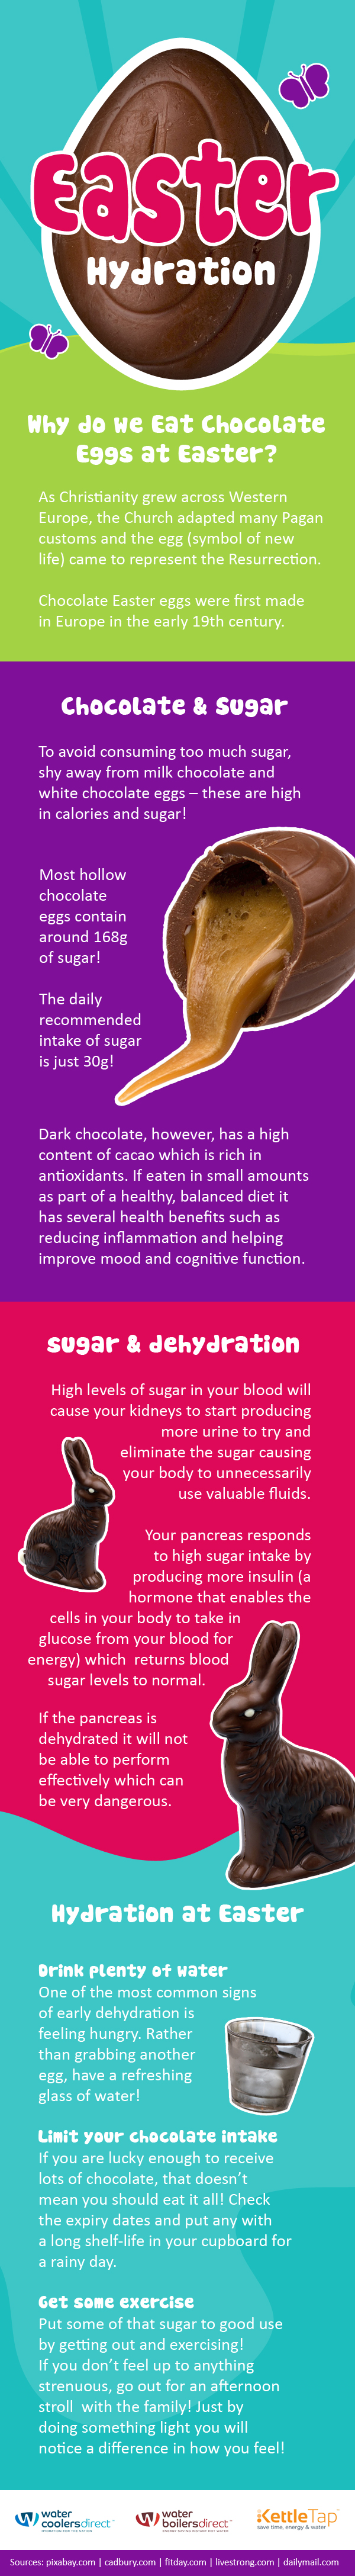 Easter Hydration Tips